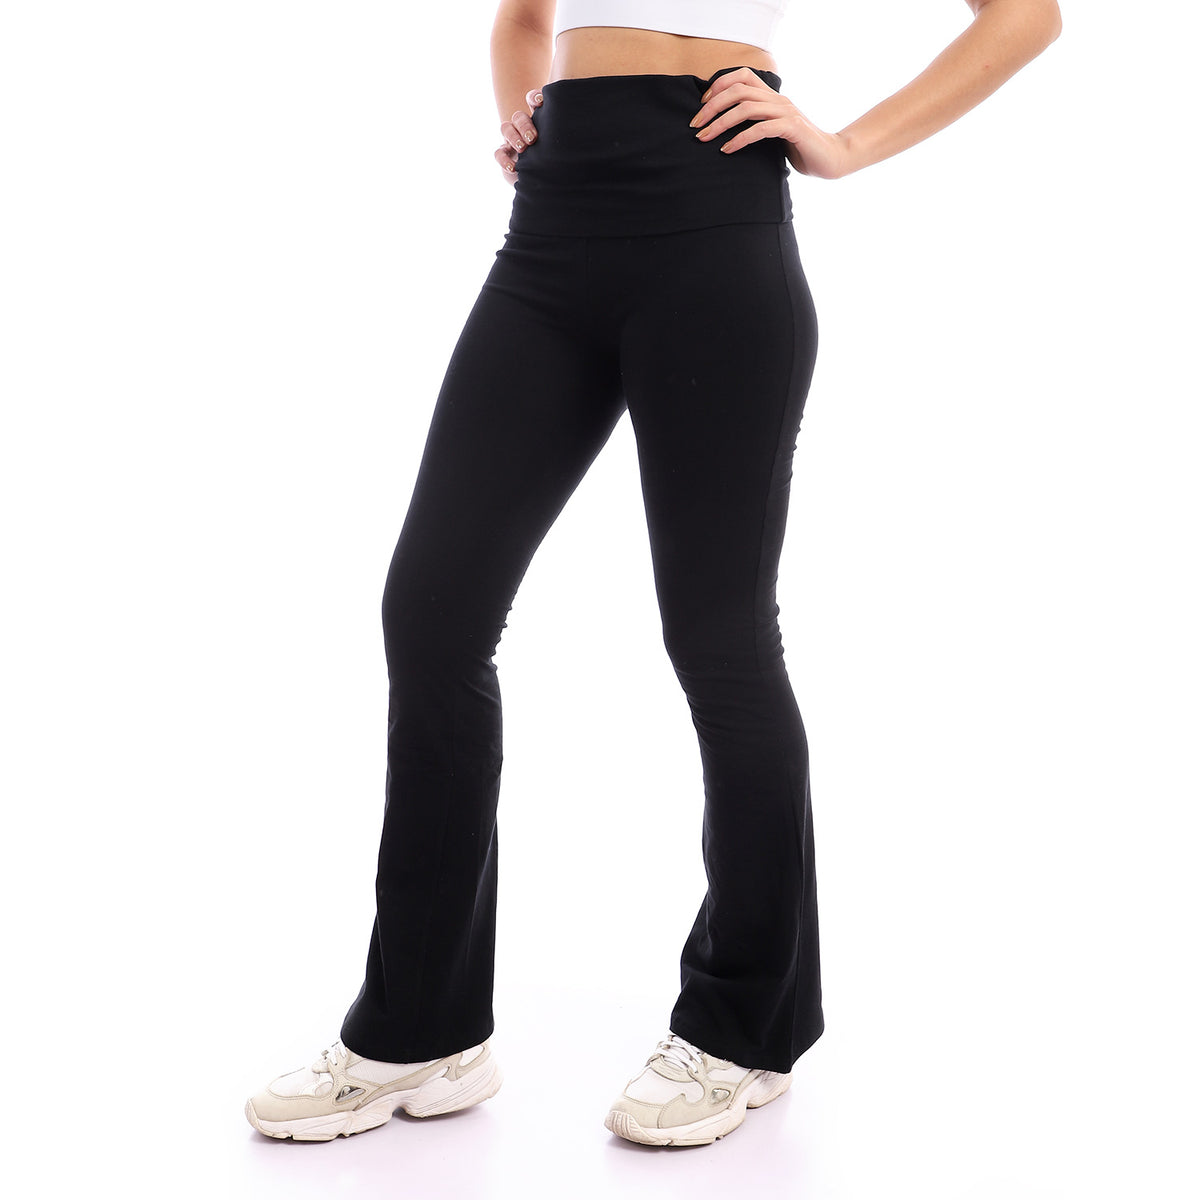 Why You Should Fold Down Those High-Waisted Leggings - OrthoPelvicPT